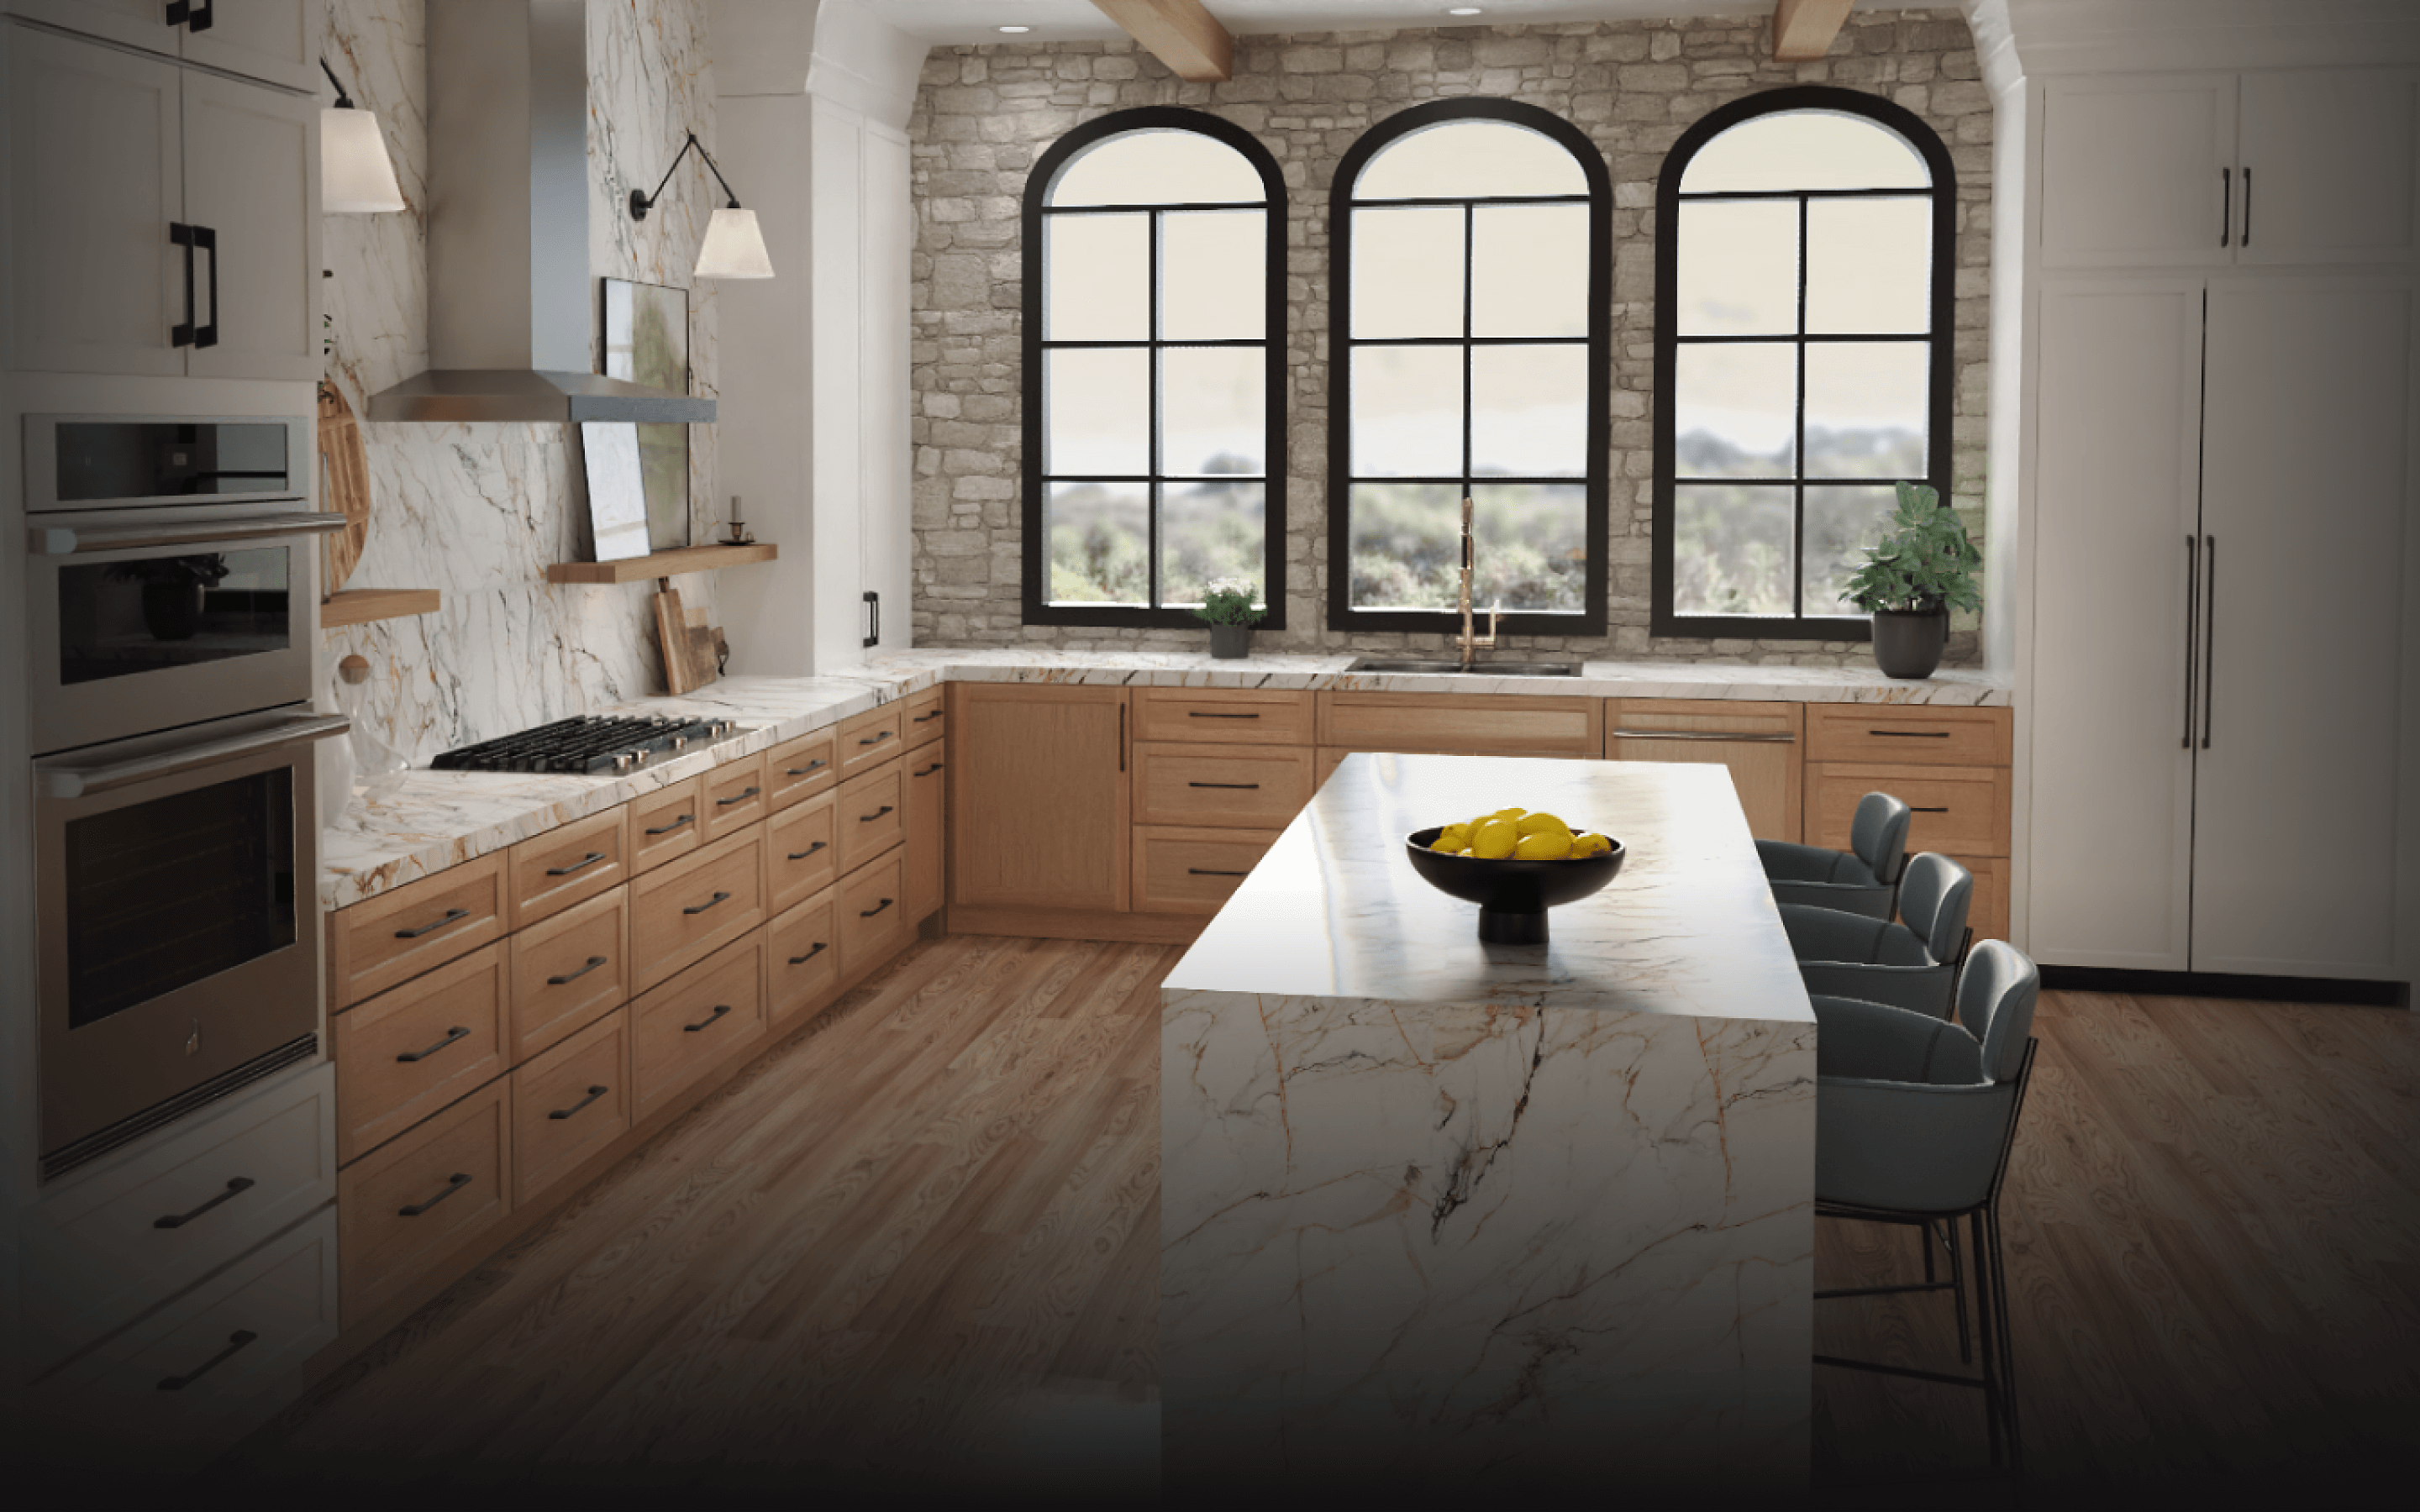 A contemporary kitchen with JennAir® appliances.